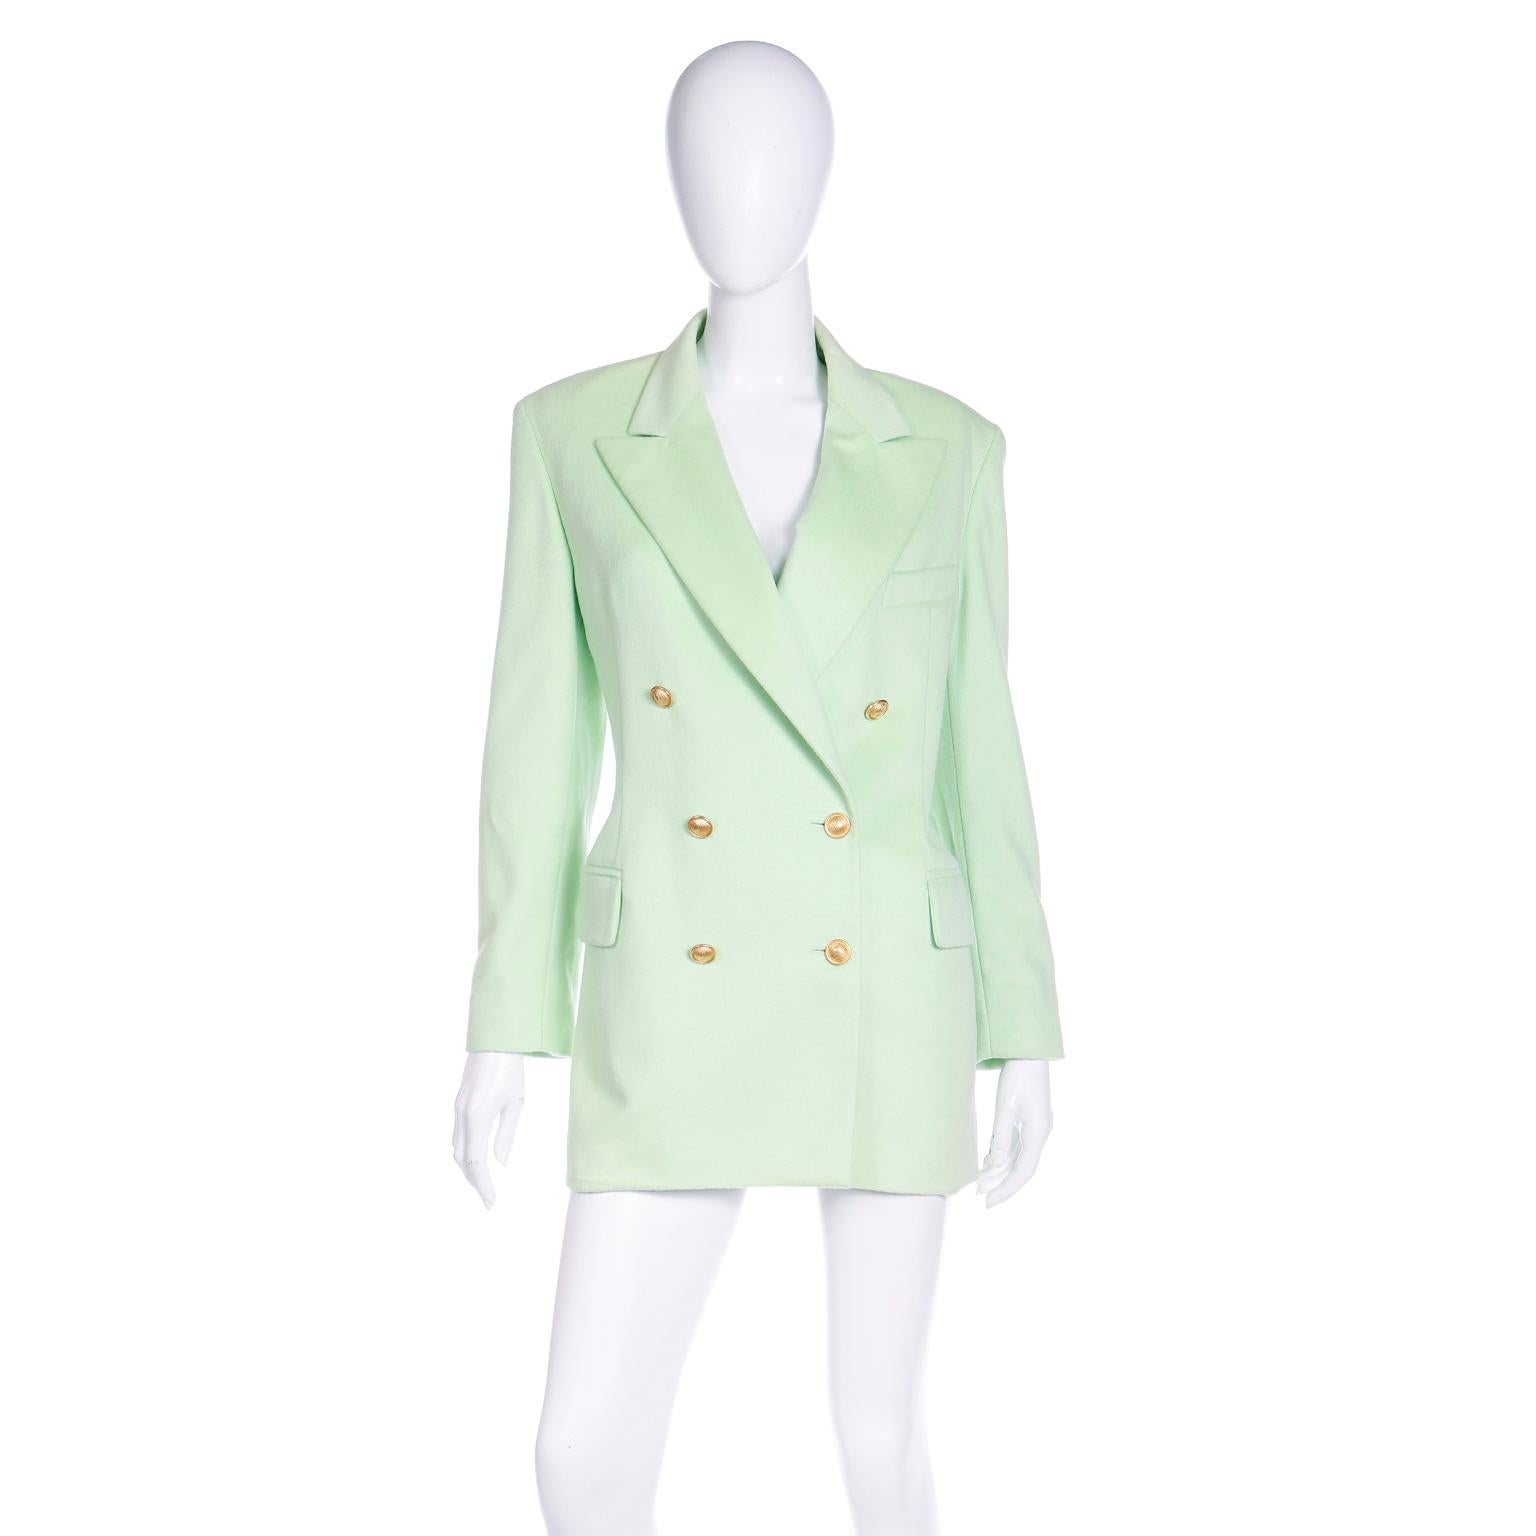 We love vintage Escada and this minty lime green cashmere blend jacket will carry you through the Summer months and year round. This double breasted blazer style jacket has the signature branded Escada rayon lining, notched lapels, built in shoulder